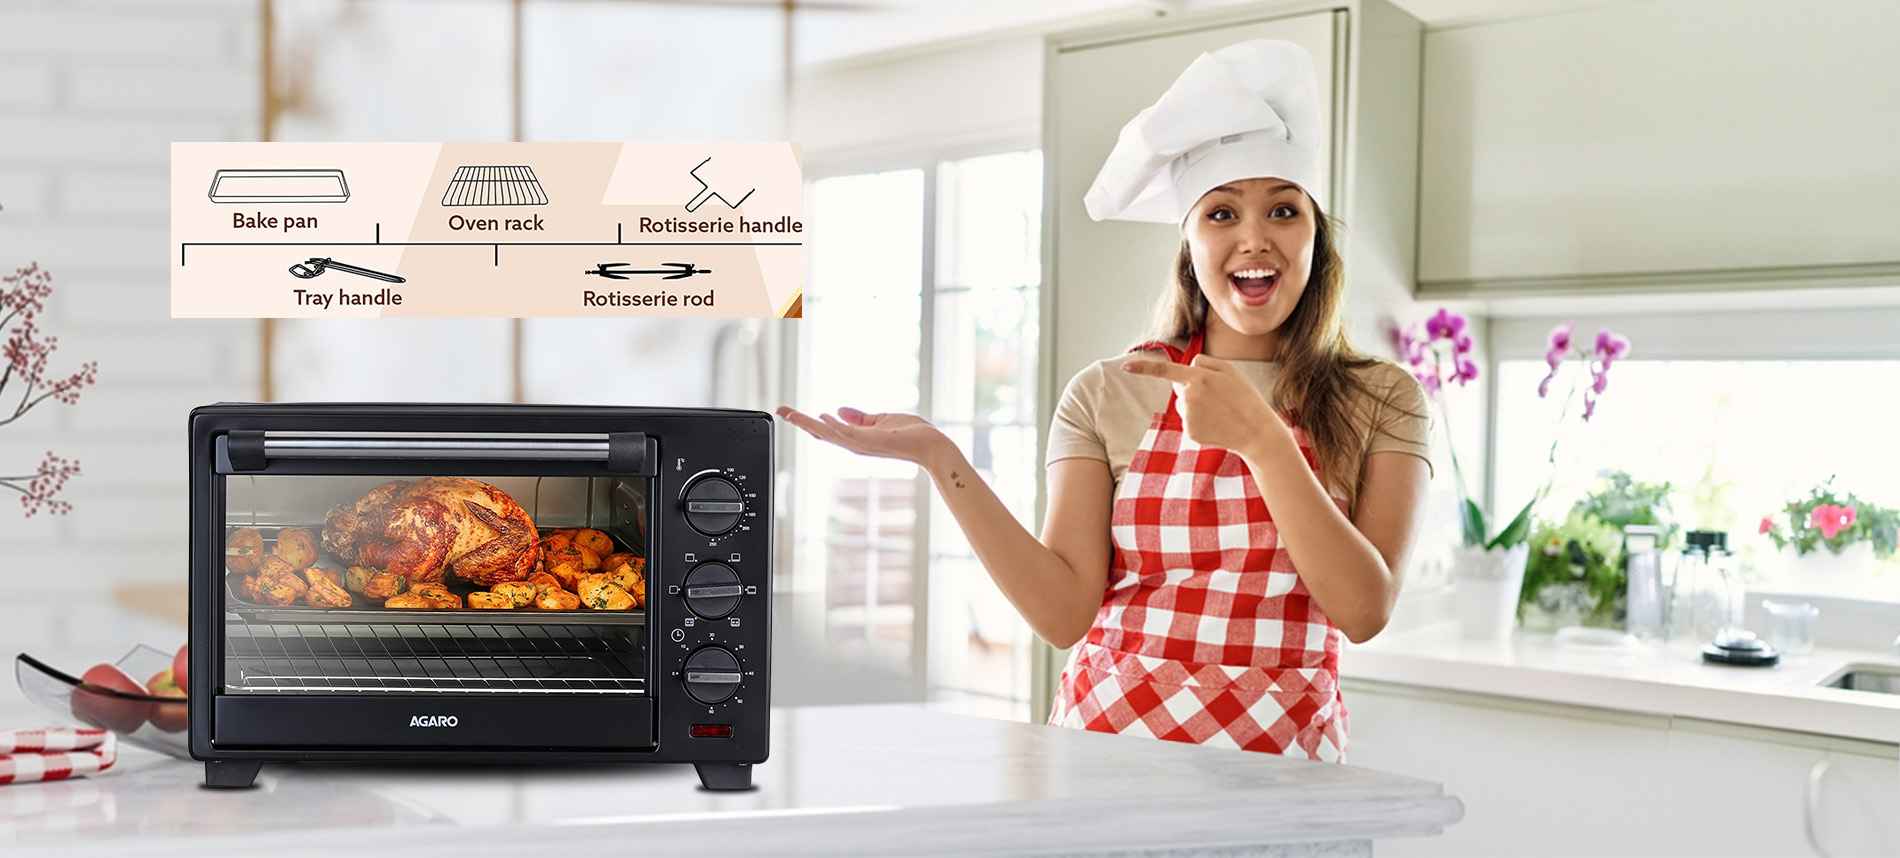 OTG Oven Accessories You Need in Your Kitchen – Agaro